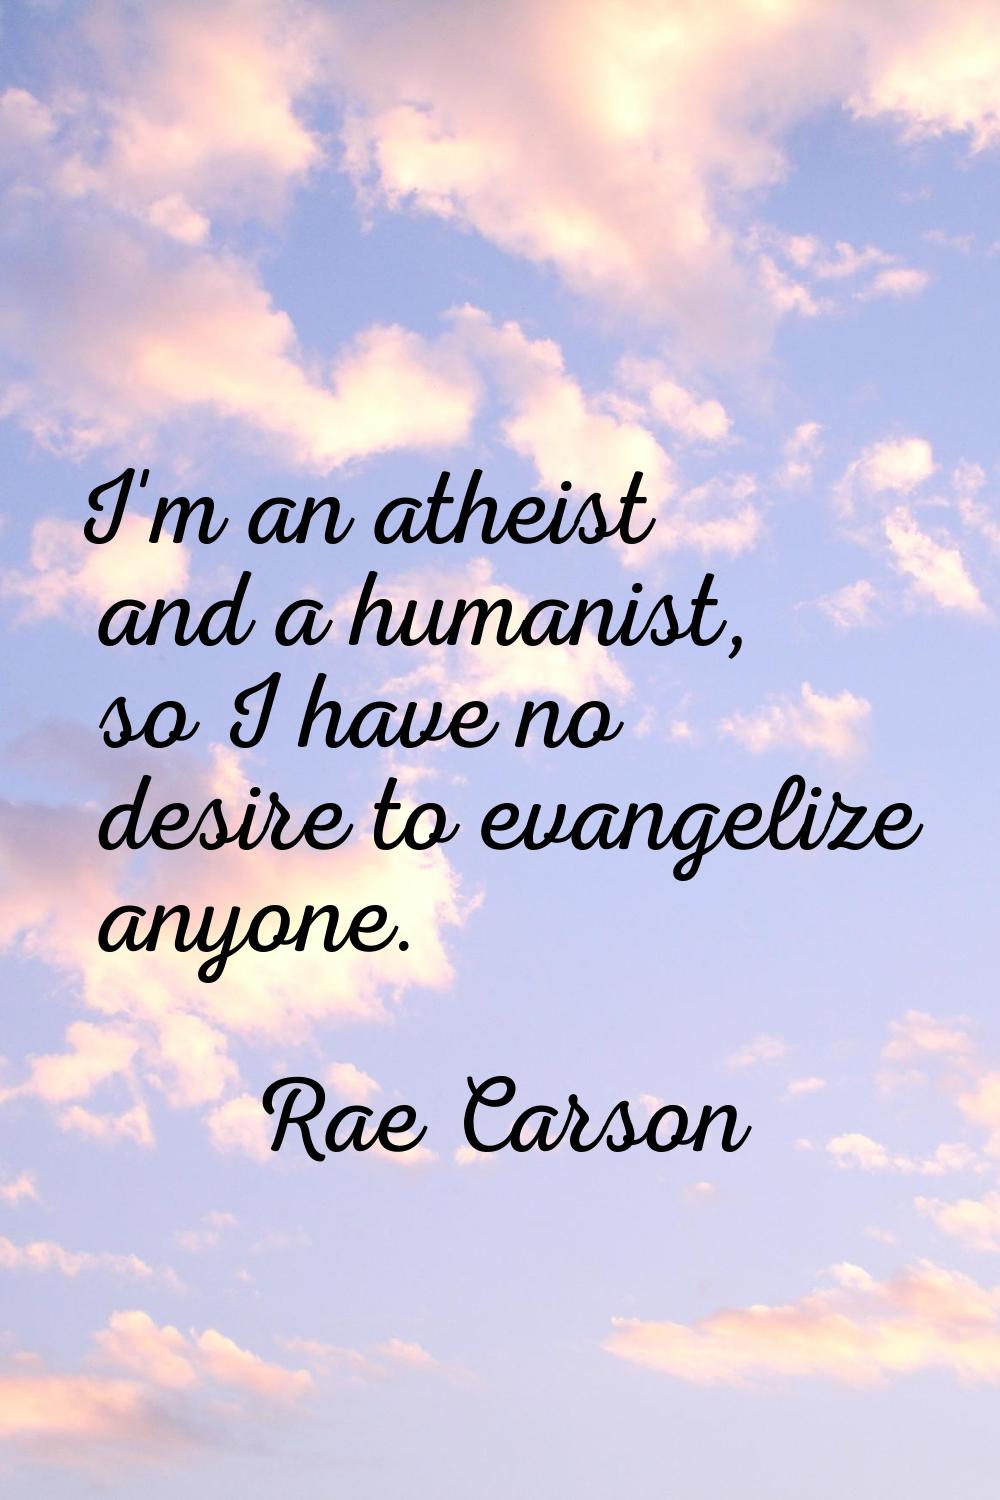 I'm an atheist and a humanist, so I have no desire to evangelize anyone.